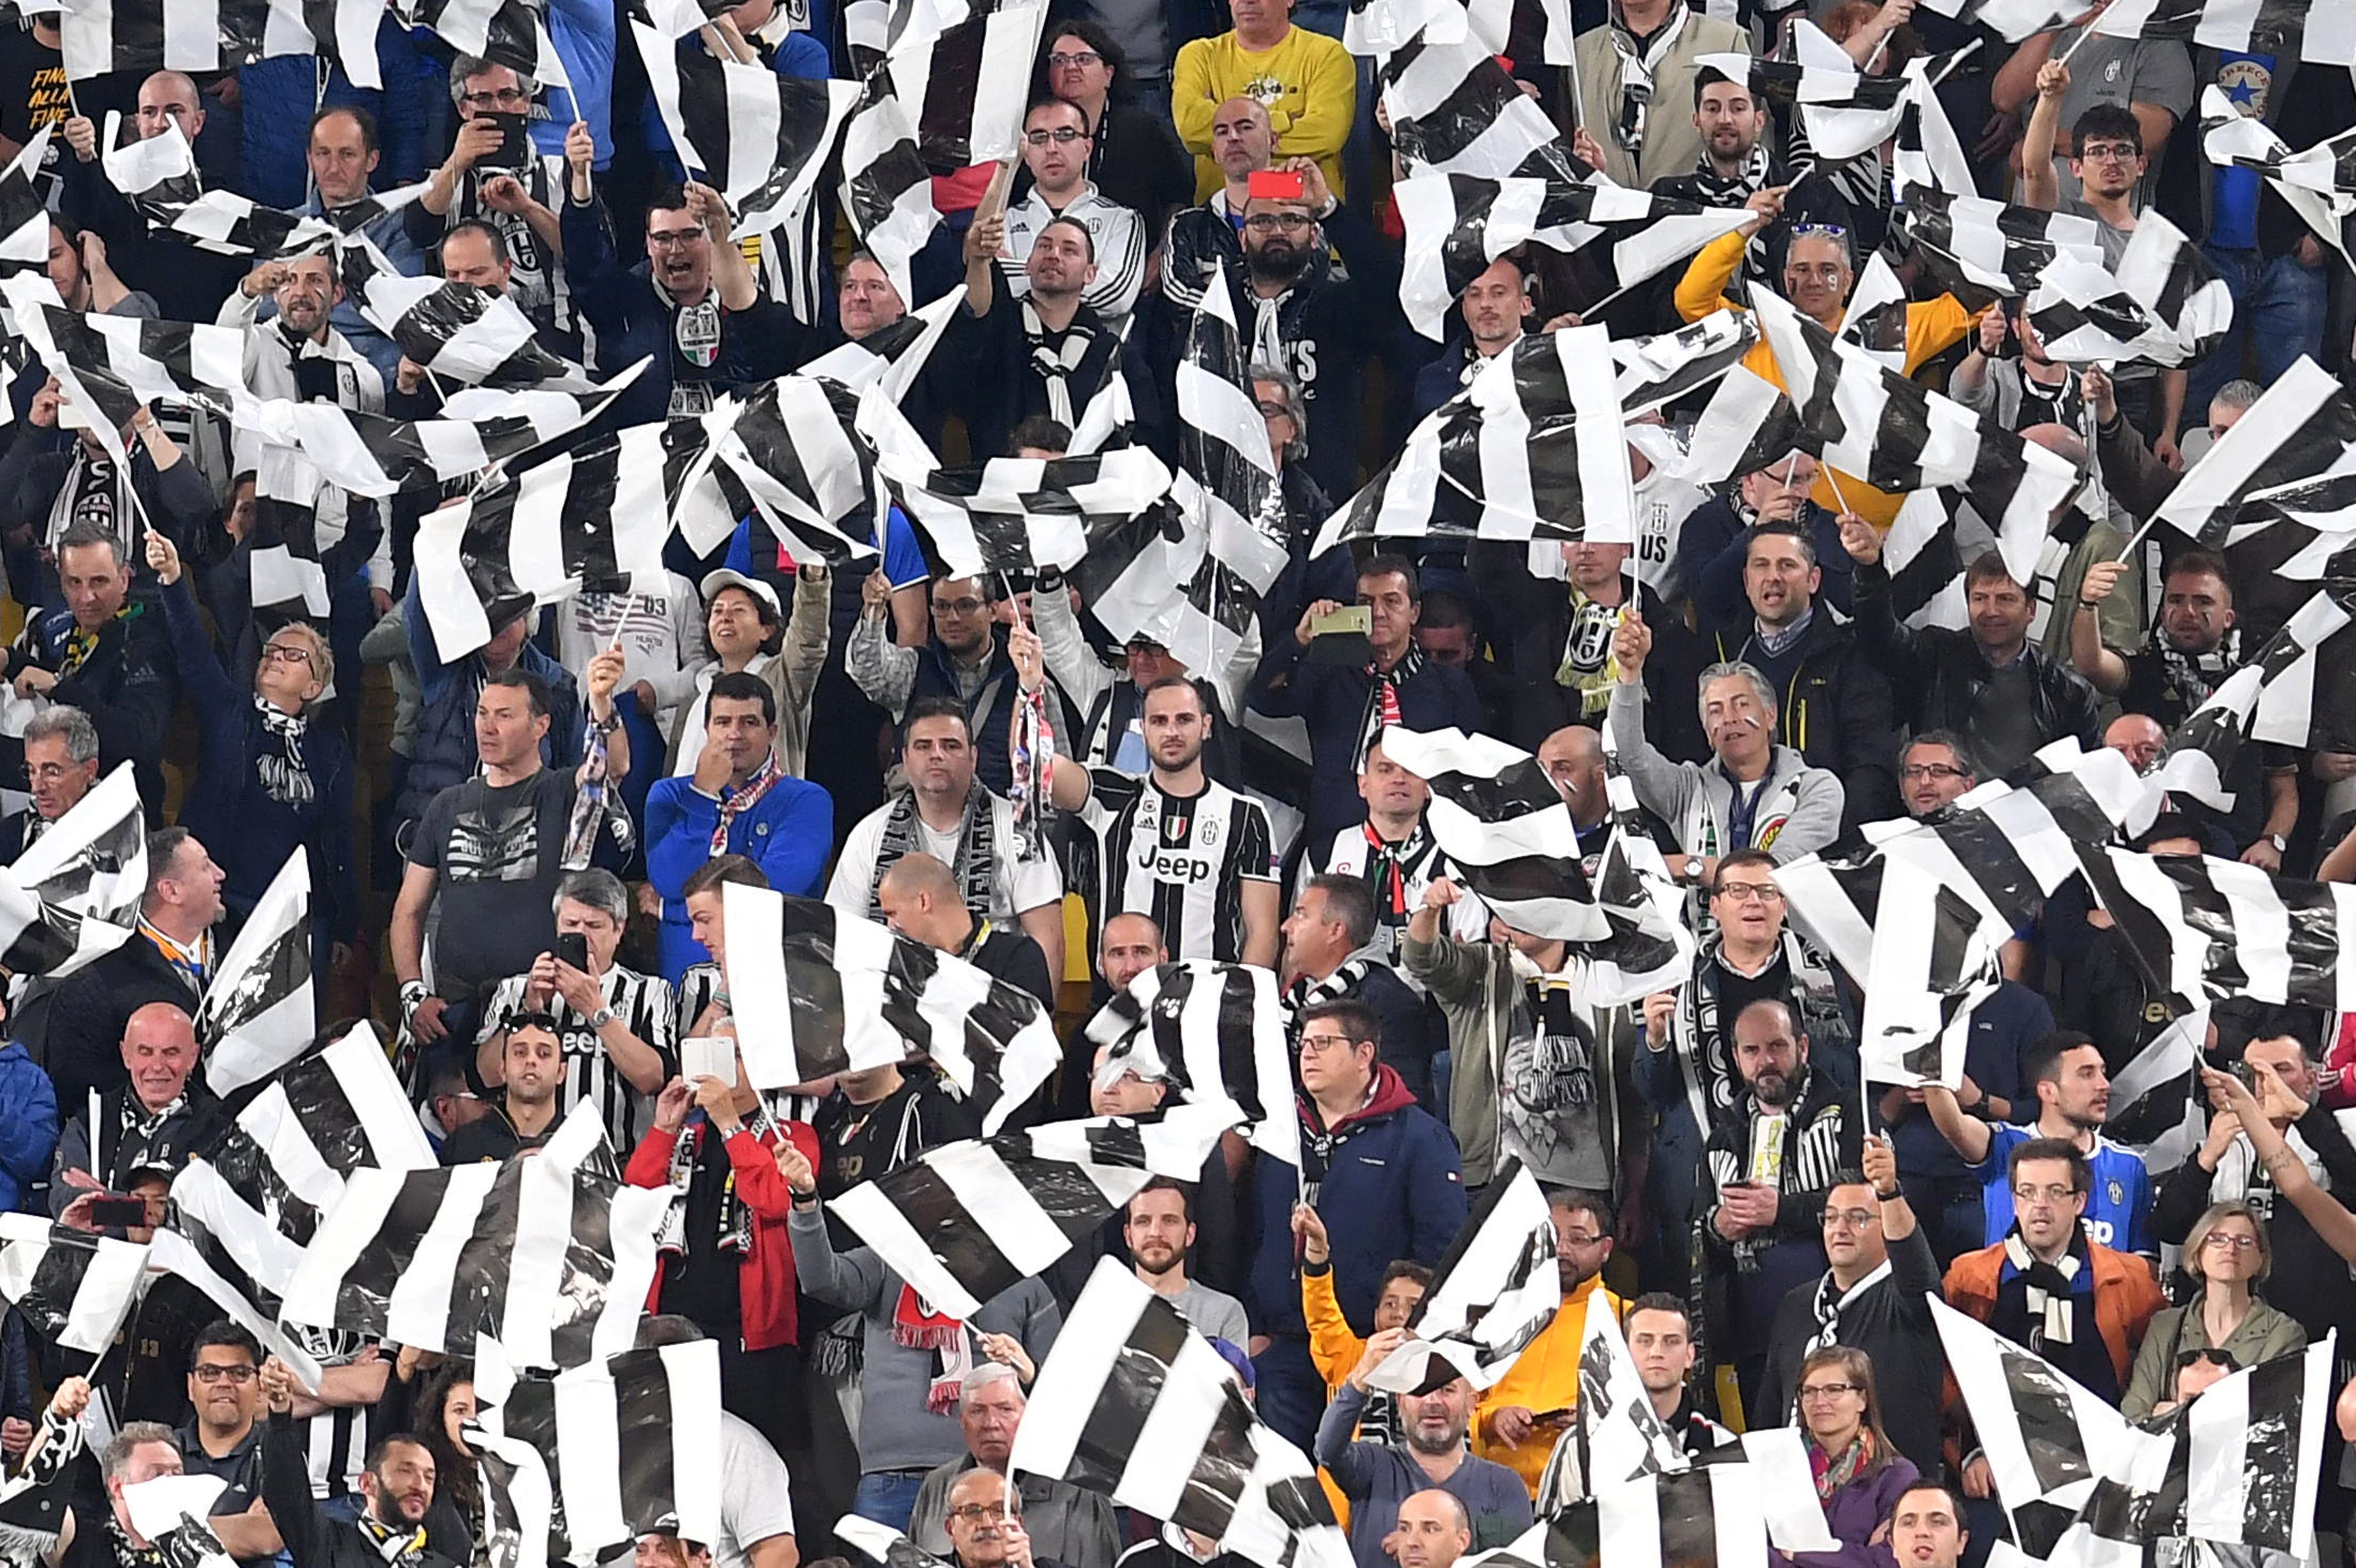 Juventus secured their place in the final of the Champions League on Tuesday after beating Monaco 2-1 in their semi-final second leg to win the tie 4-1 on aggregate. / AFP PHOTO / Alberto PIZZOLI        (Photo credit should read ALBERTO PIZZOLI/AFP/Getty Images)